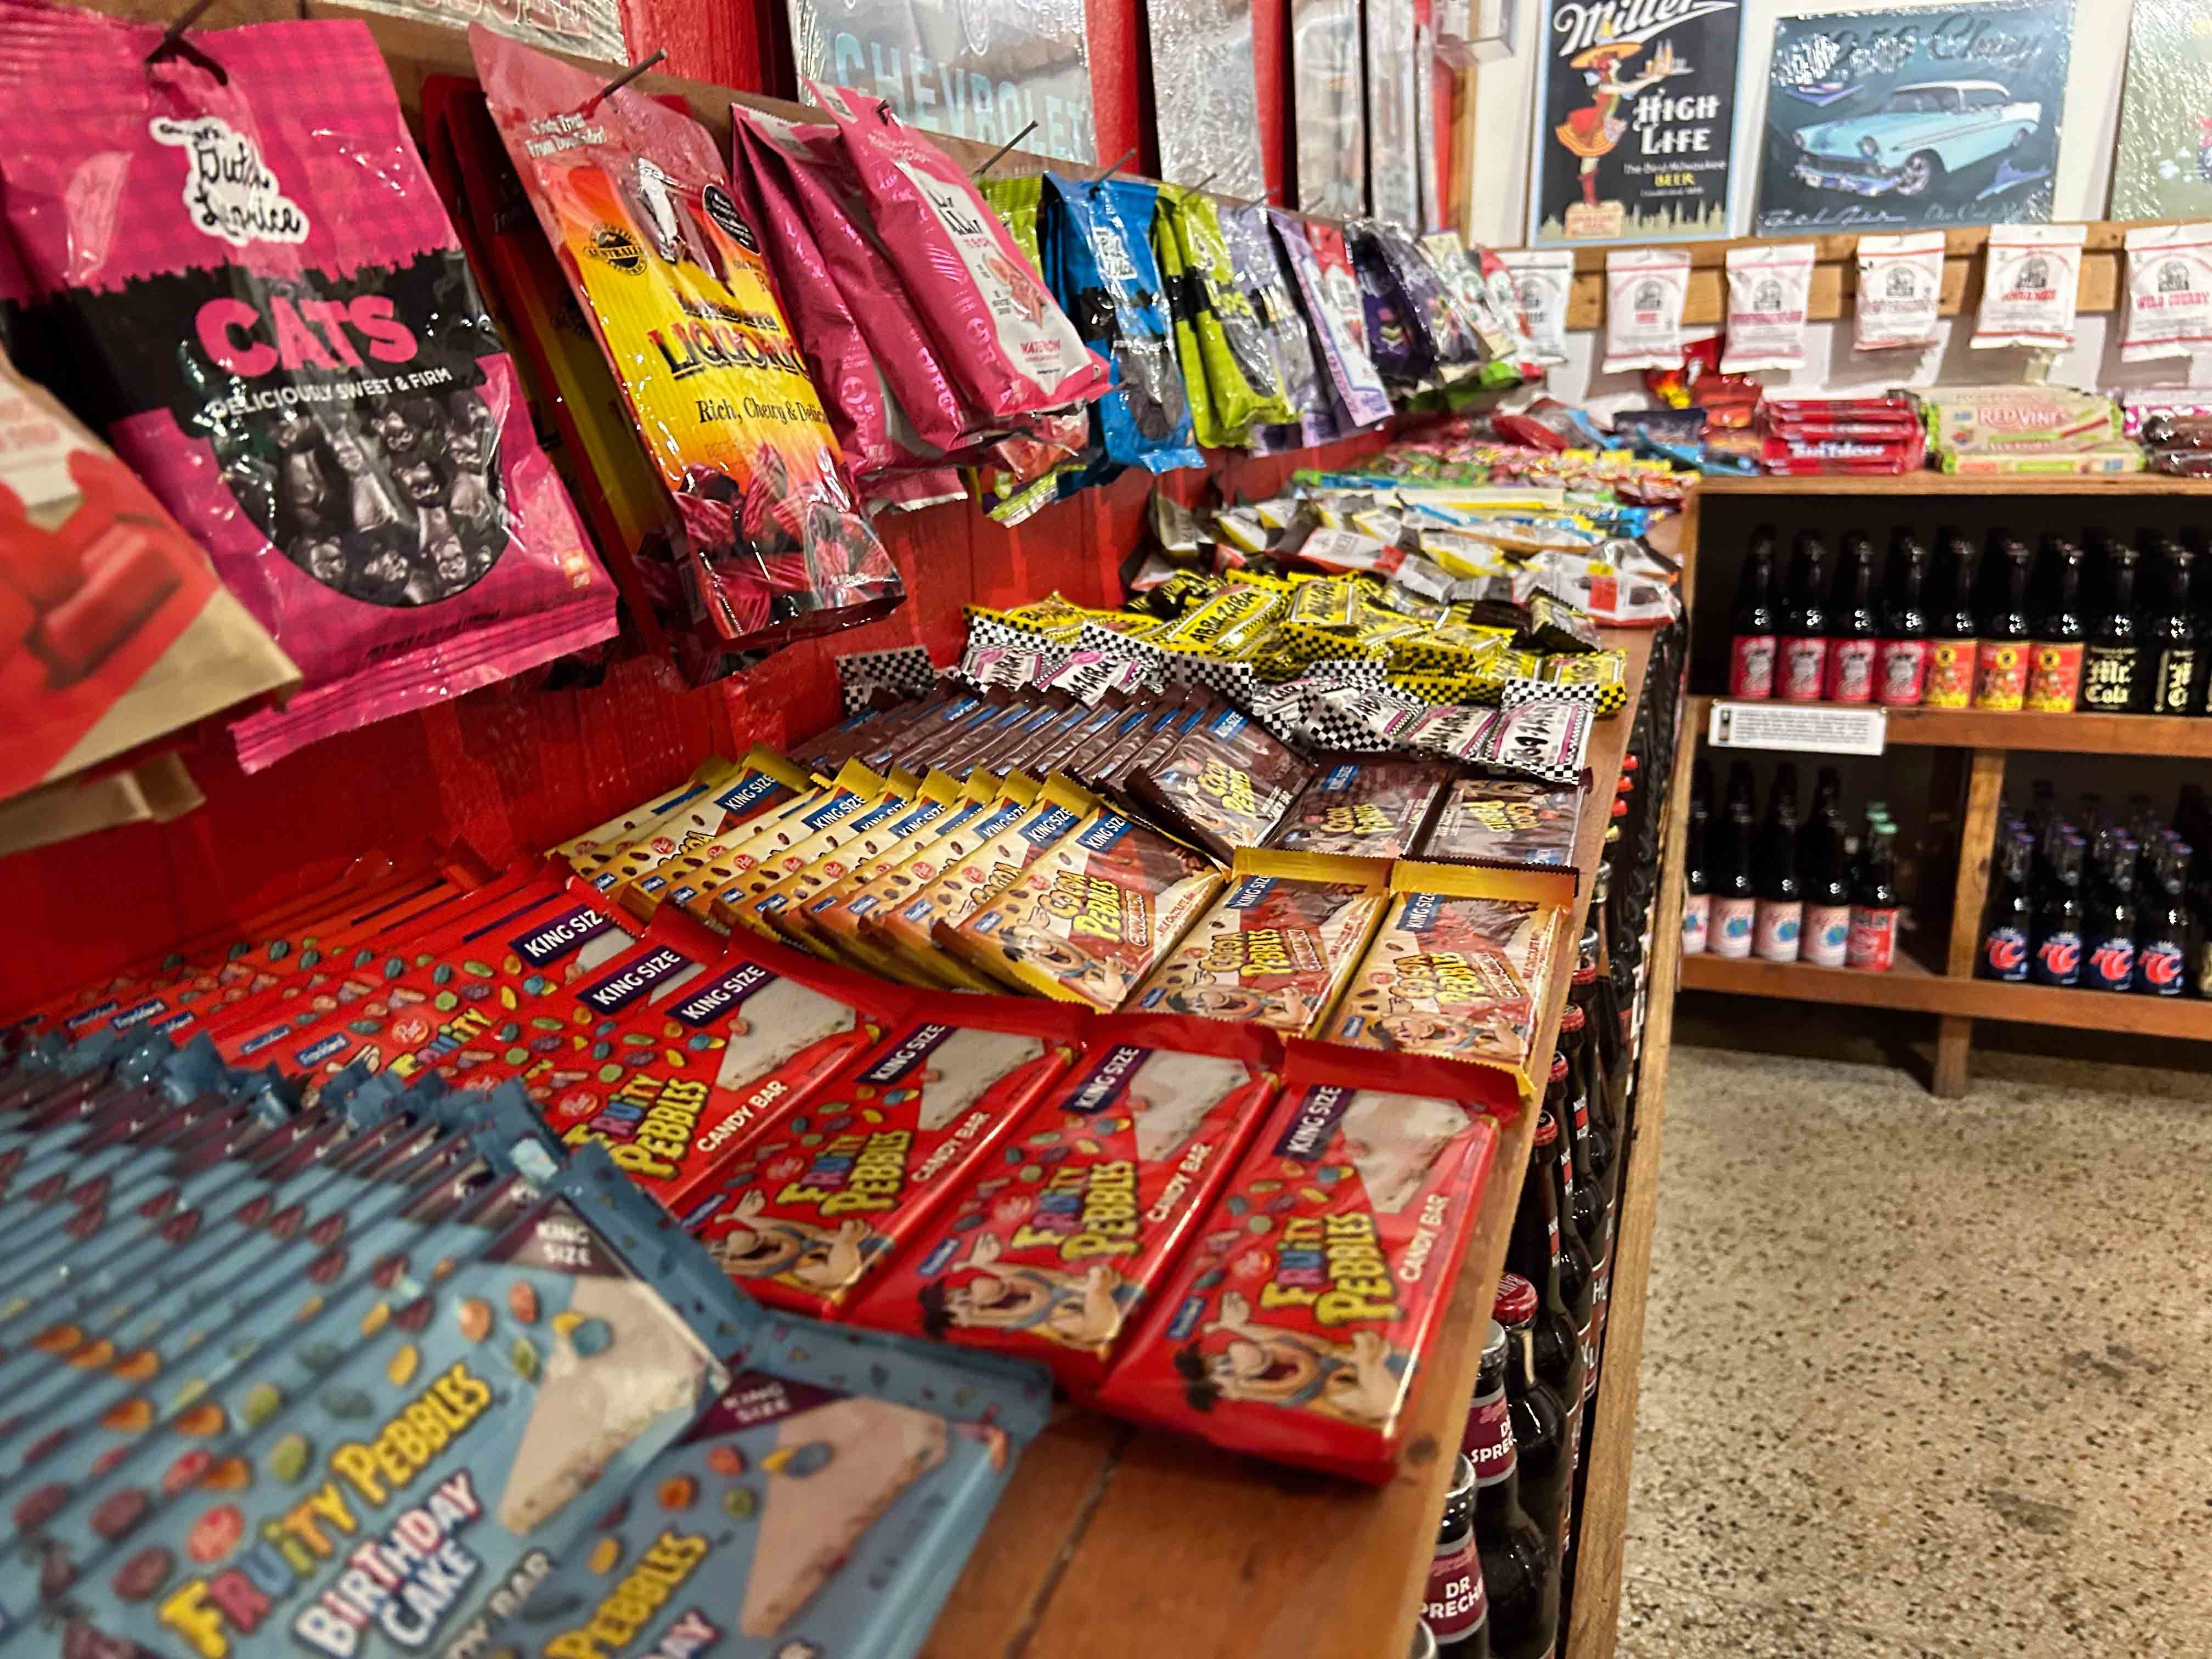 Interior of candy on shelves in Rocket Fizz, Winter Park